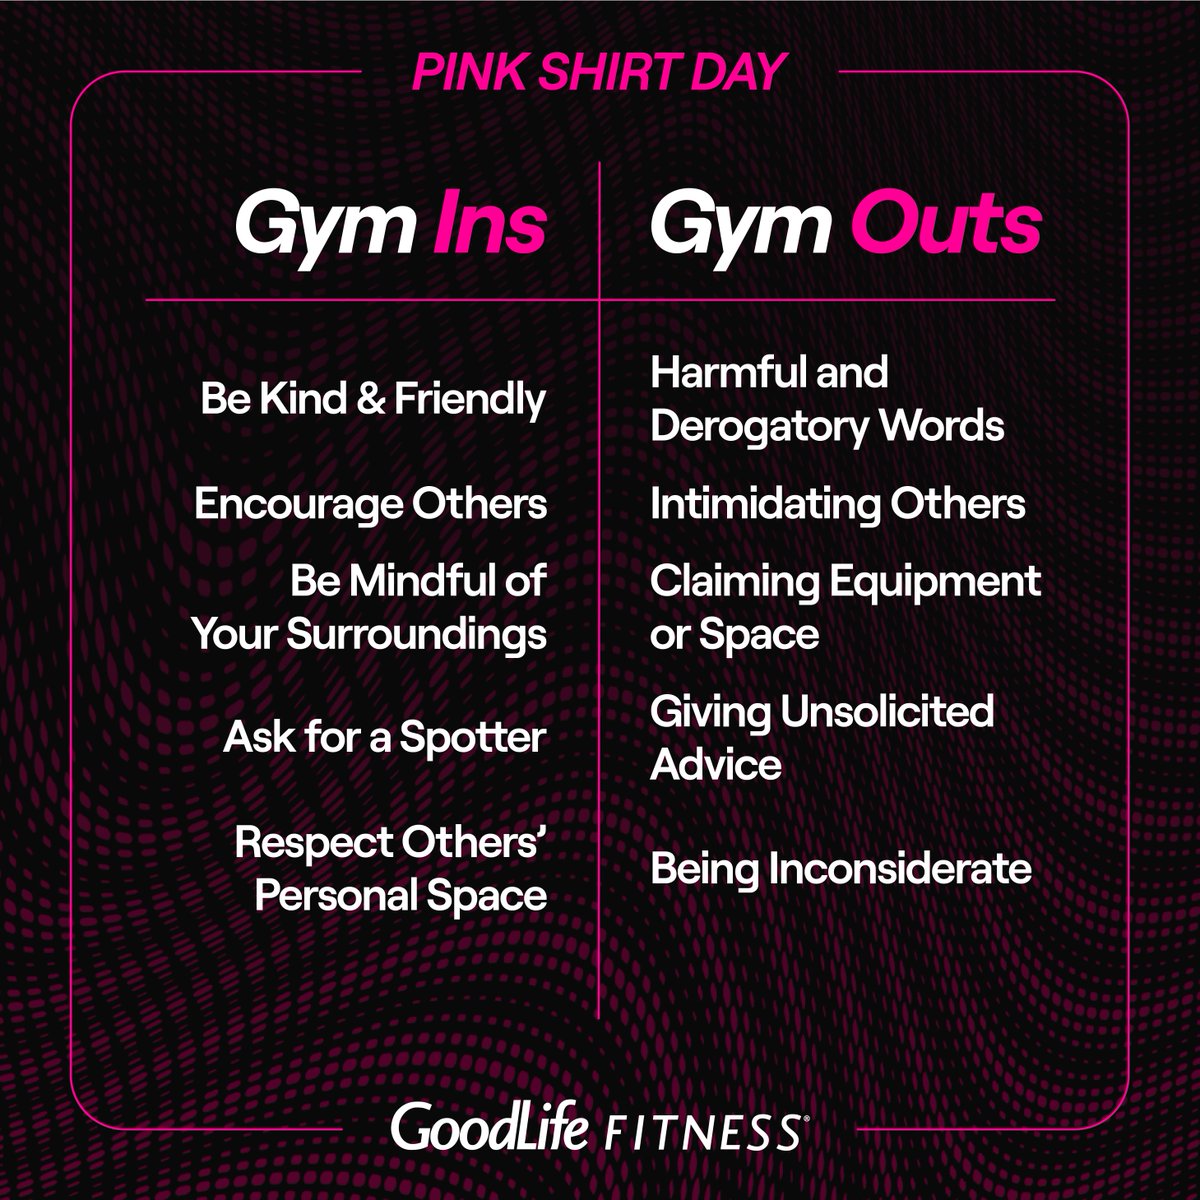 Pink Shirt Day, also known as Anti-Bullying Day, is about kindness and standing up to bullying. We don’t tolerate bullying. We strive to be inclusive. When you see someone starting a fitness journey, treat them with kindness and compassion. Learn more at: spr.ly/6017n43nL